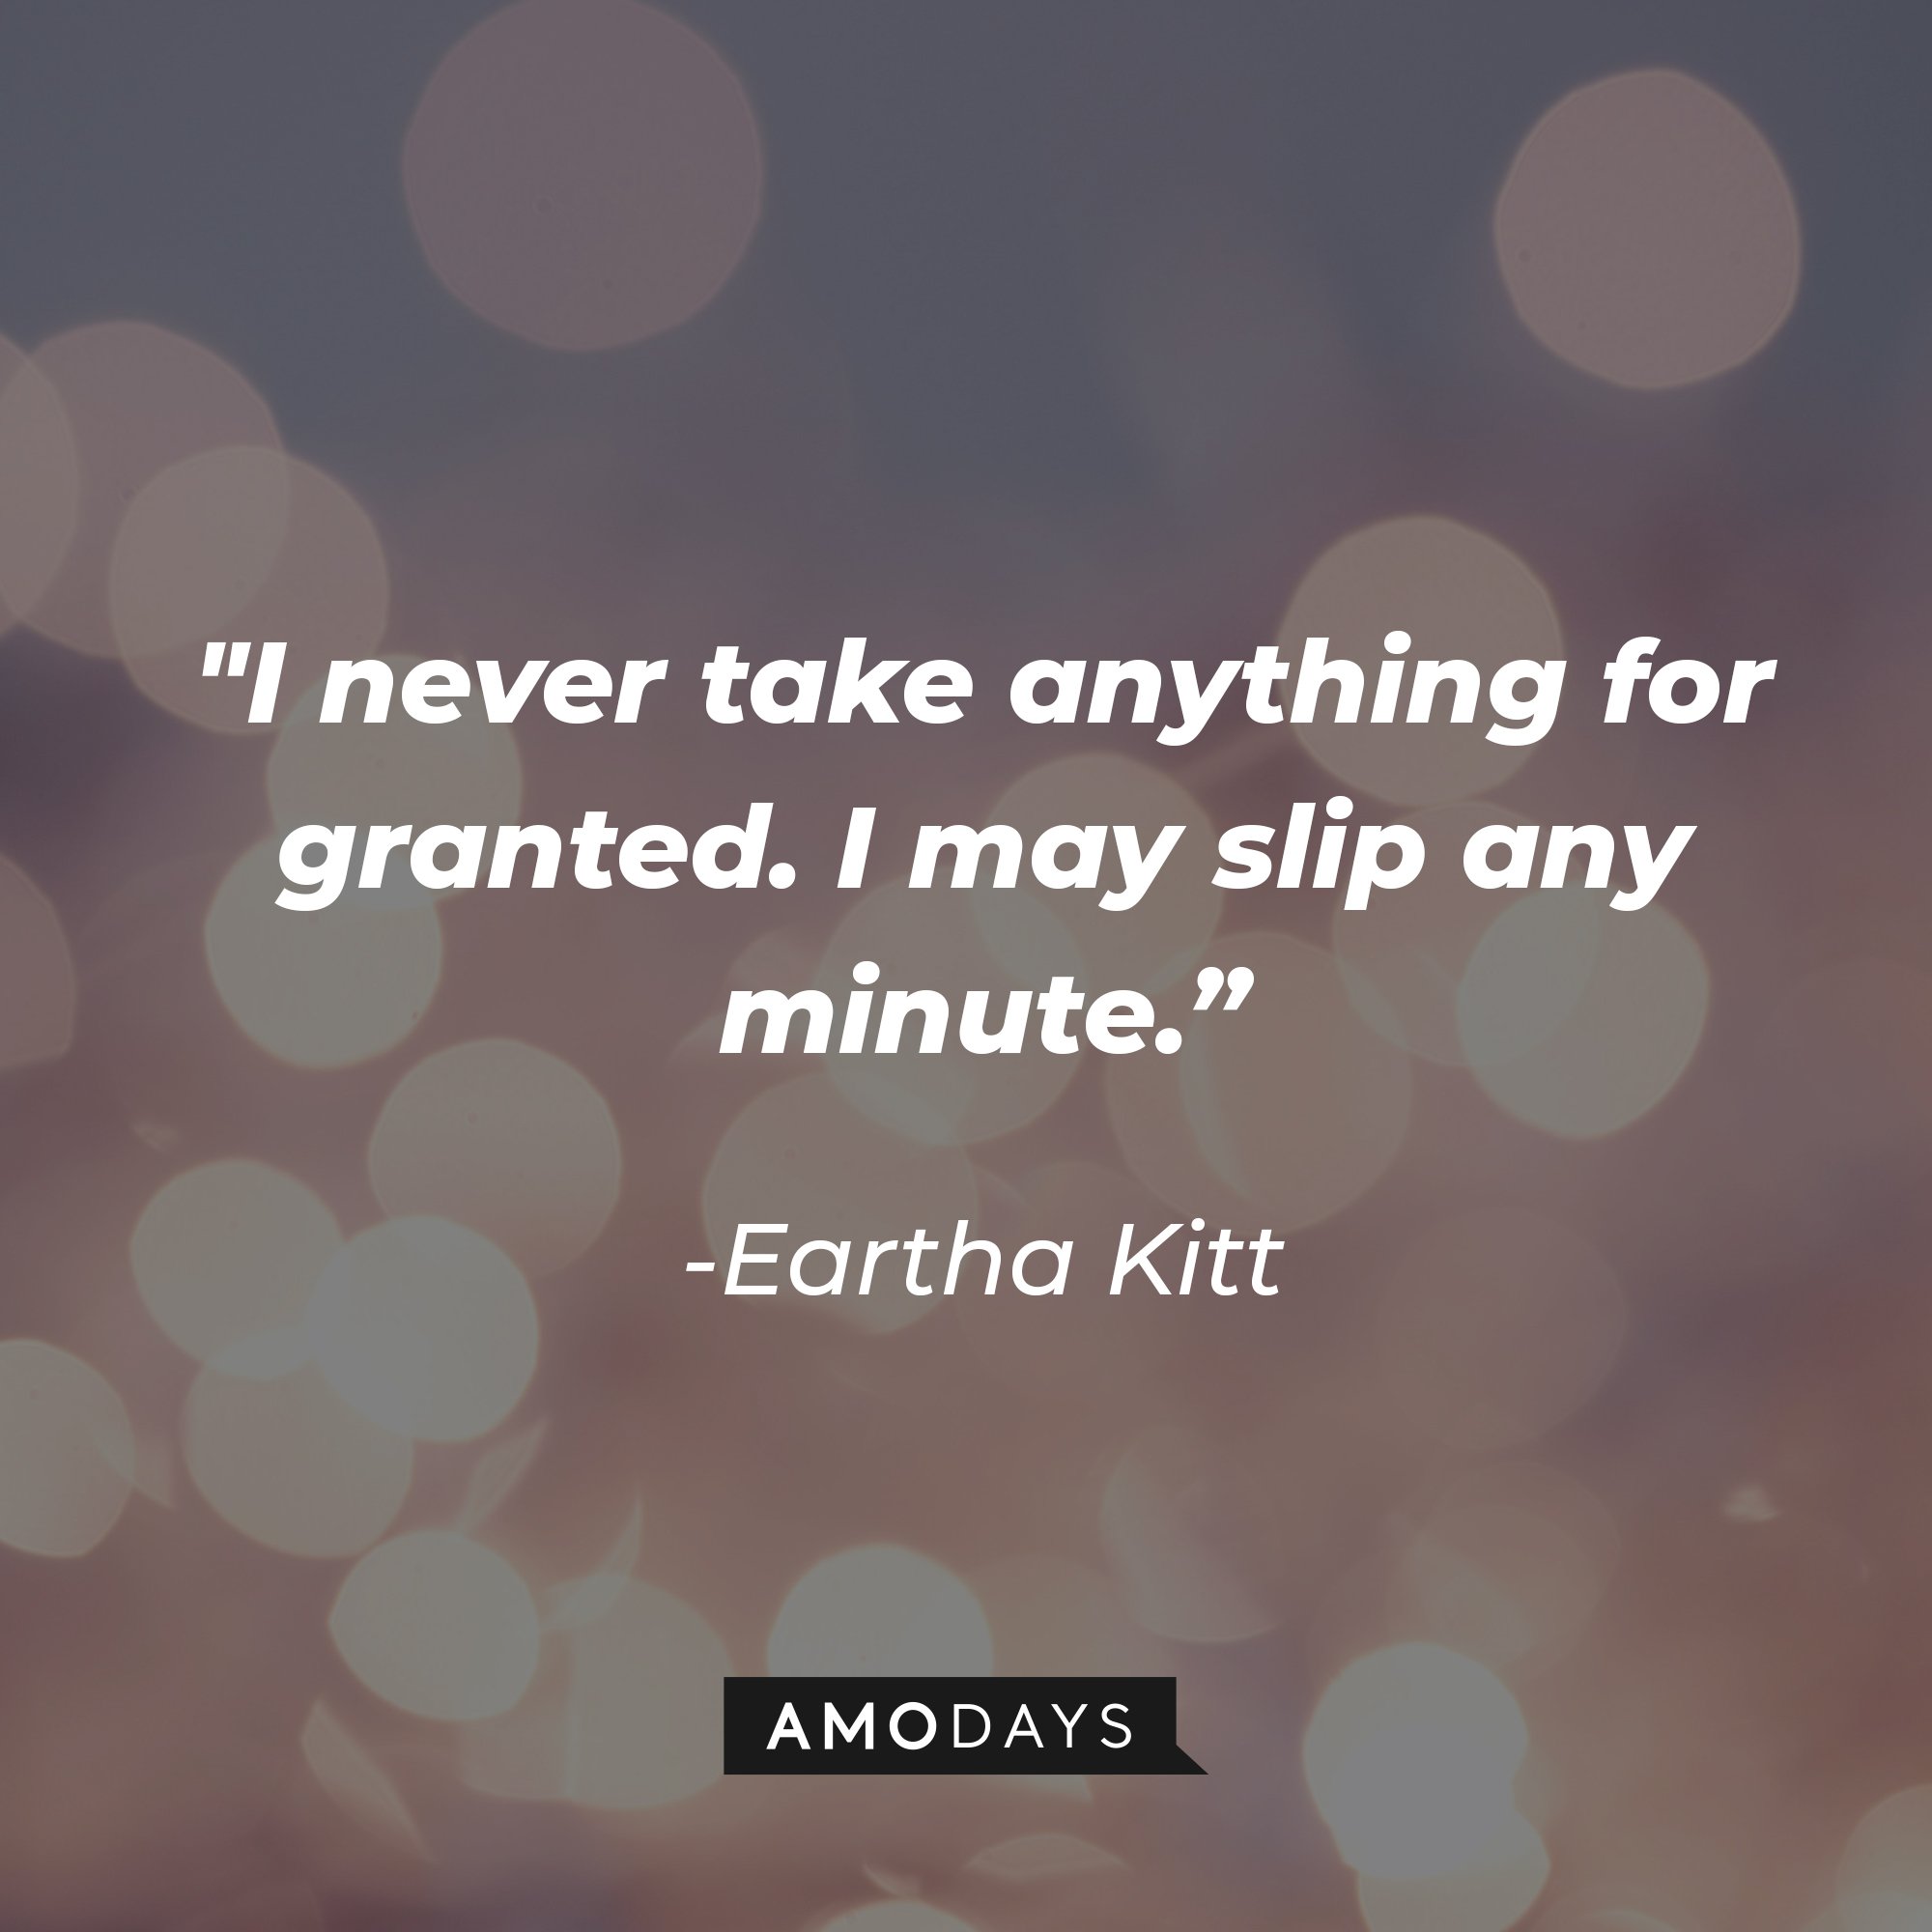 Eartha Kitt’s quote: "I never take anything for granted. I may slip any minute.” | Image: AmoDays